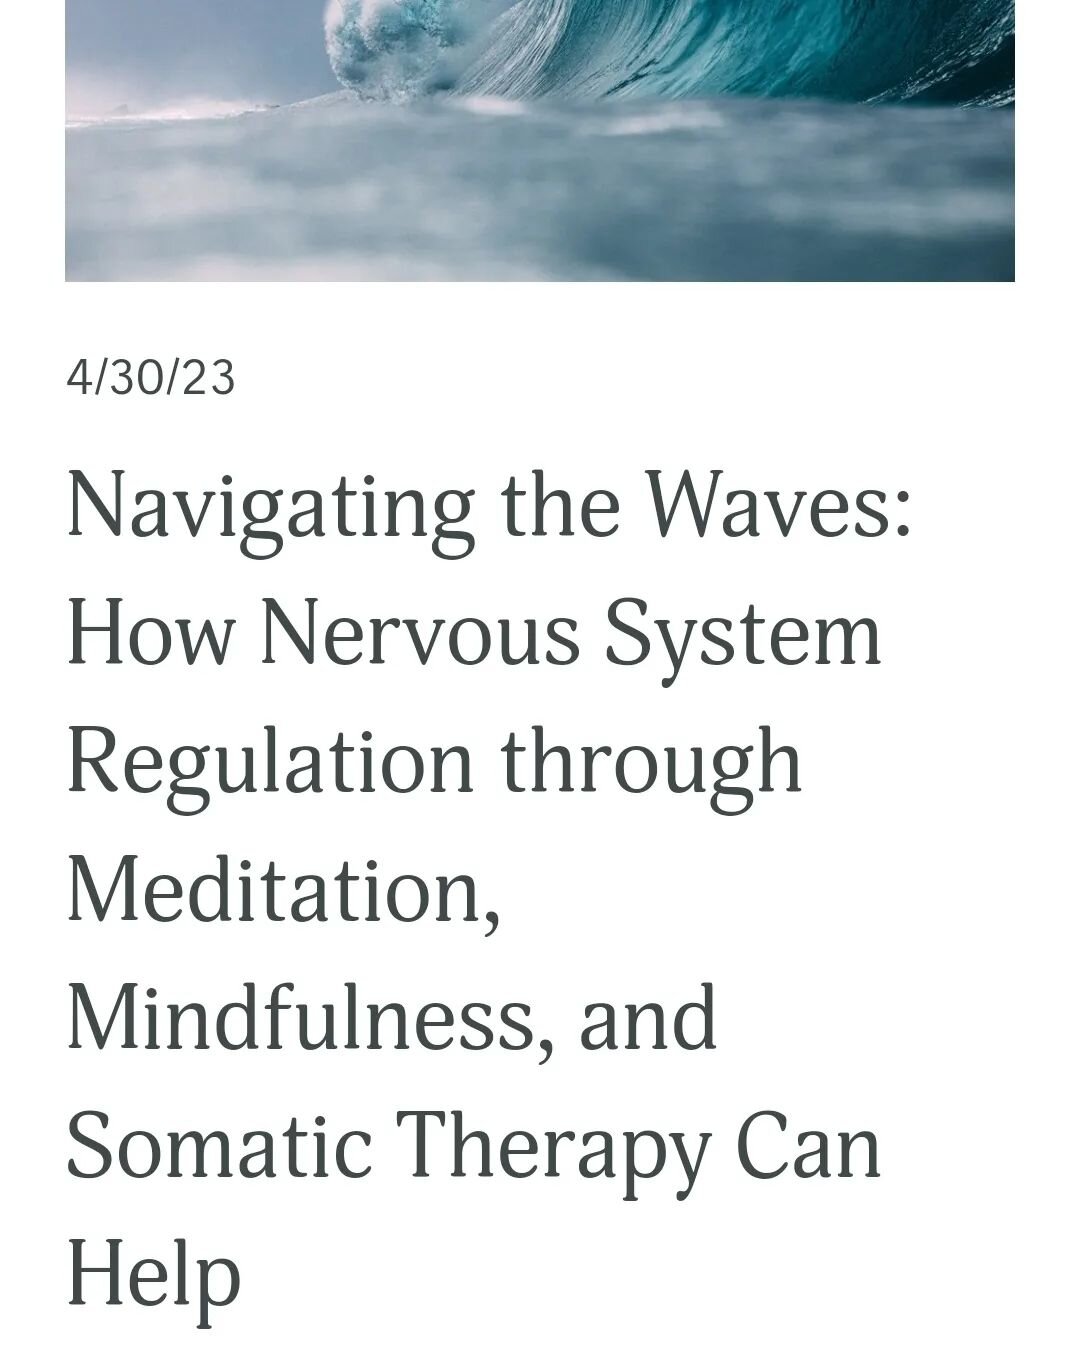 MAY BLOG POST! 🌊

By incorporating meditation, mindfulness, and somatic therapy into your routine, you can improve your nervous system regulation and cultivate a greater sense of well-being. 

So, take a deep breath, tune into your body, and ride th